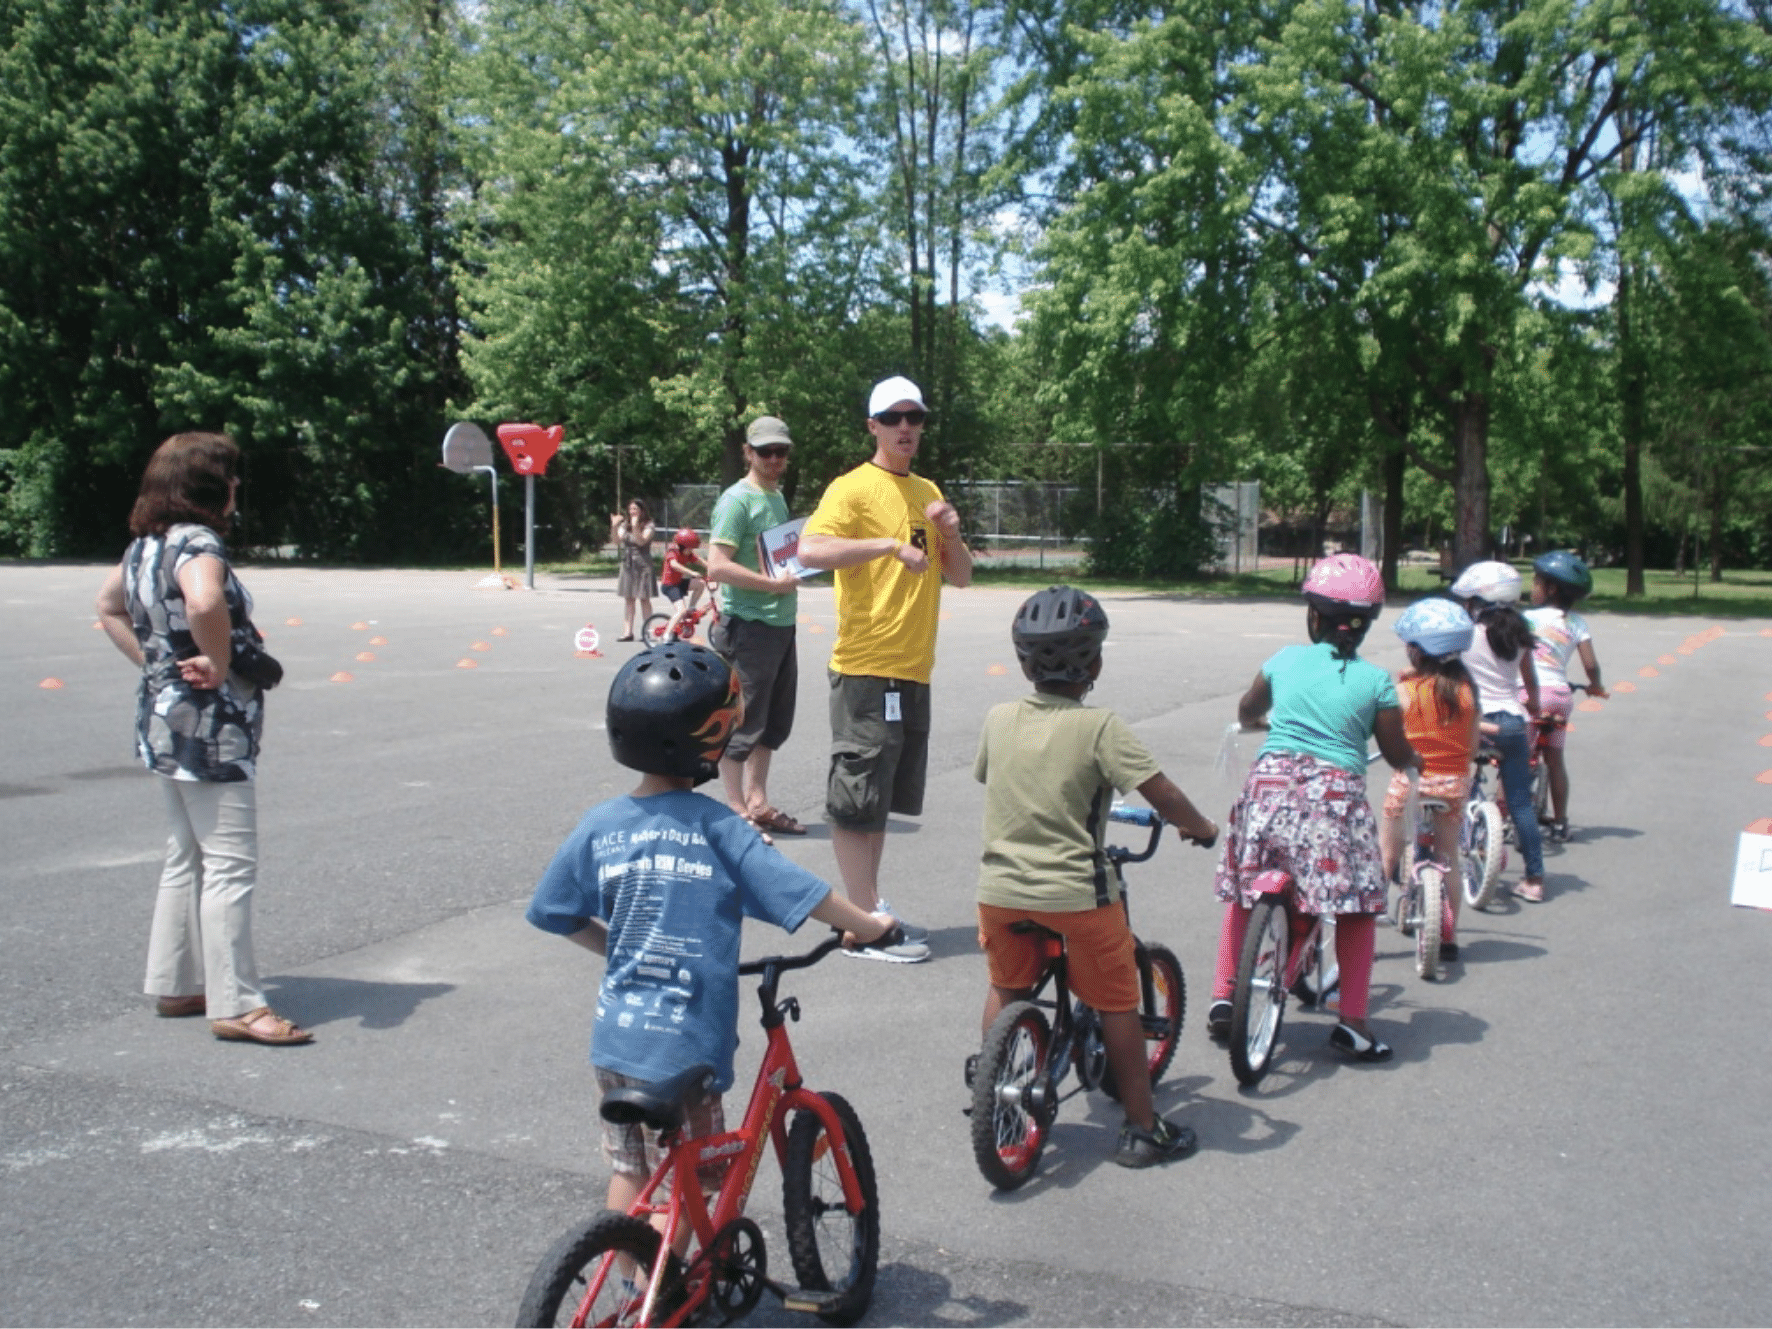 A group of elementary school students standing in line on their bicycles learning to ride in the school yard